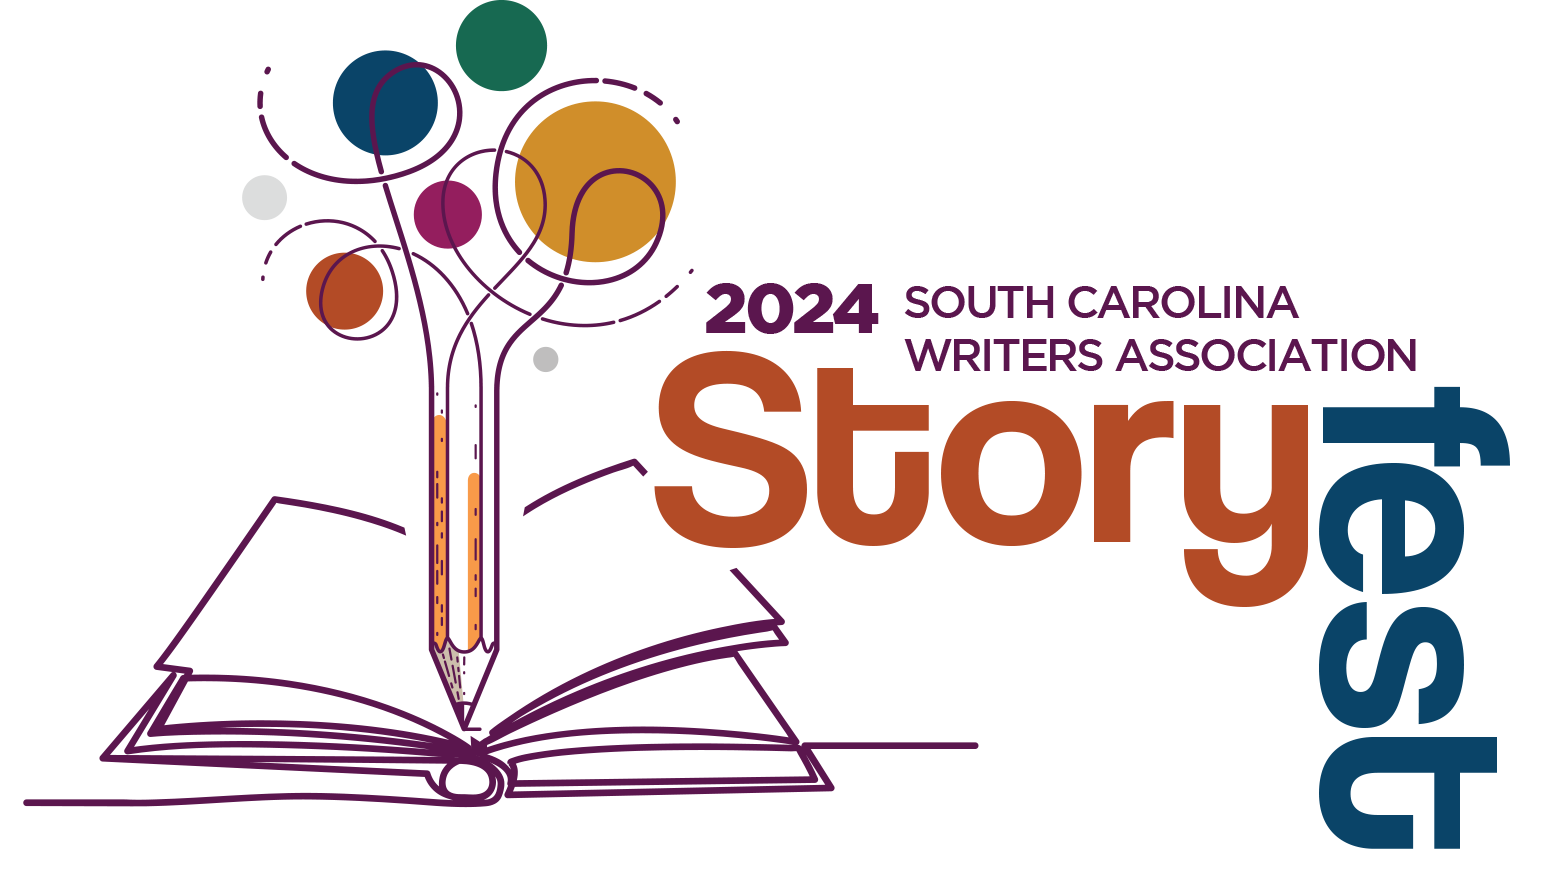 Graphic logo for 2024 Storyfest